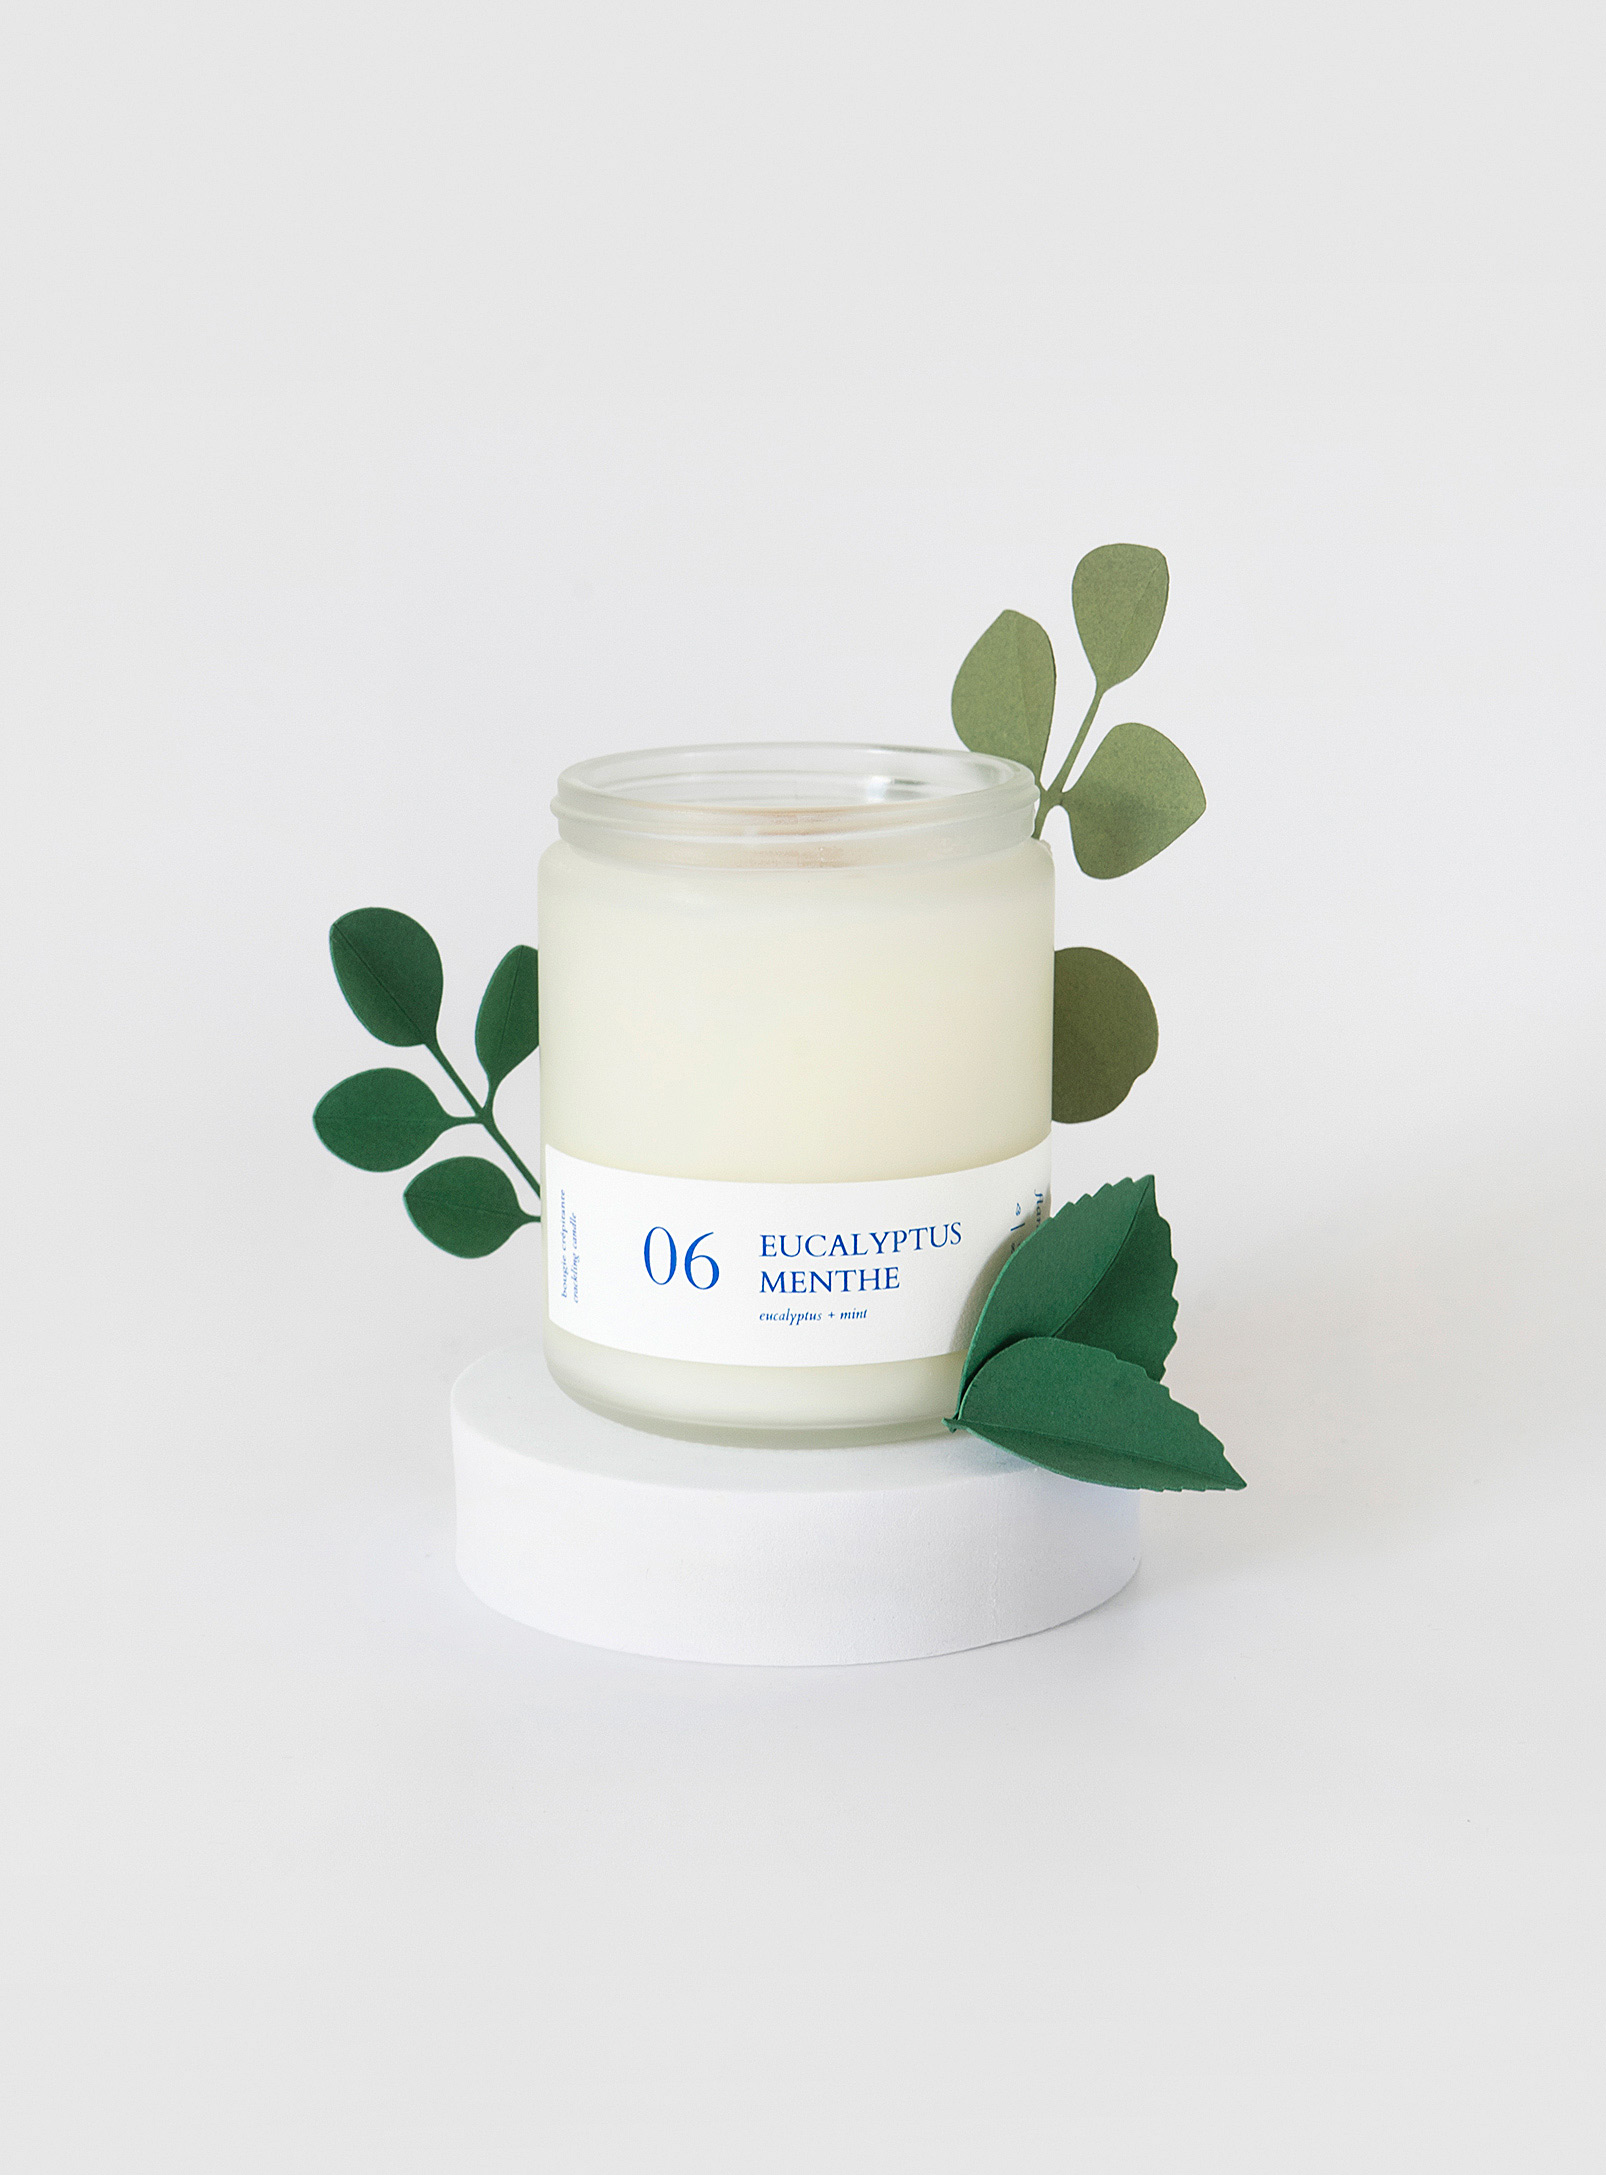 Flambette - Eucalyptus and mint scented candle